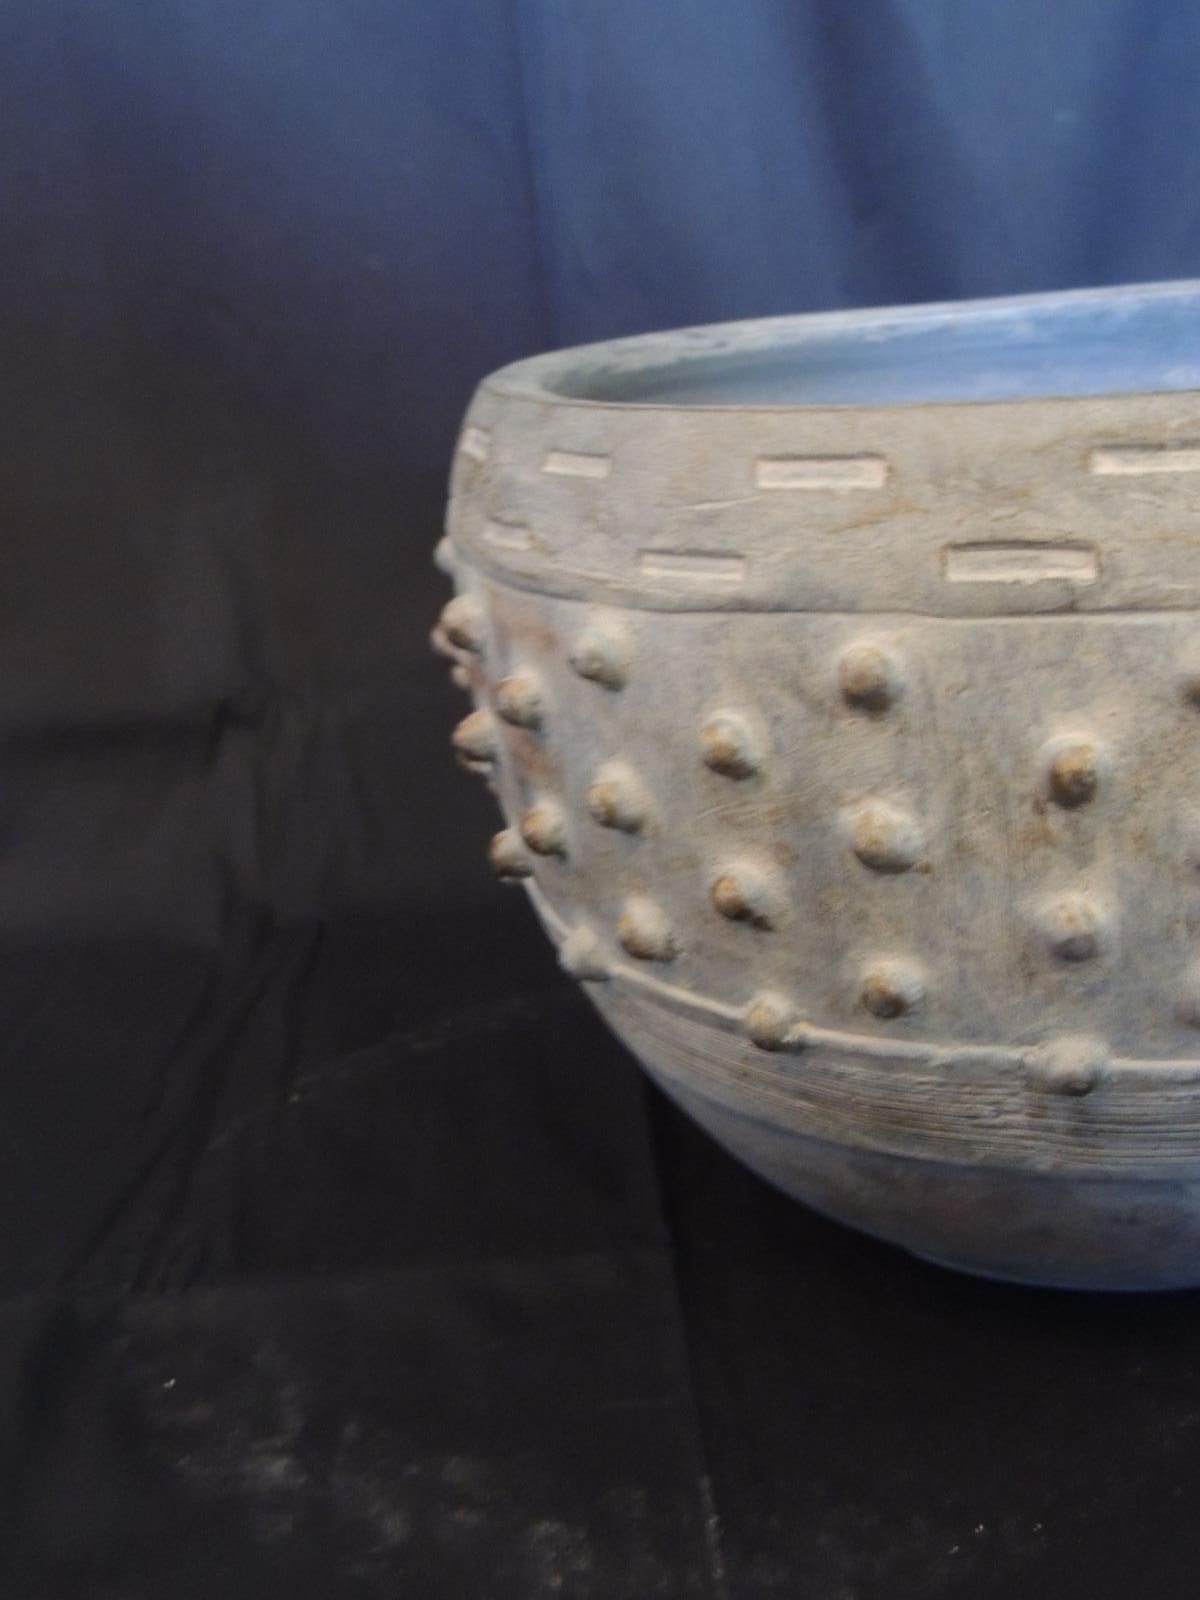 Clay and cement dust round planter.
Size: 10